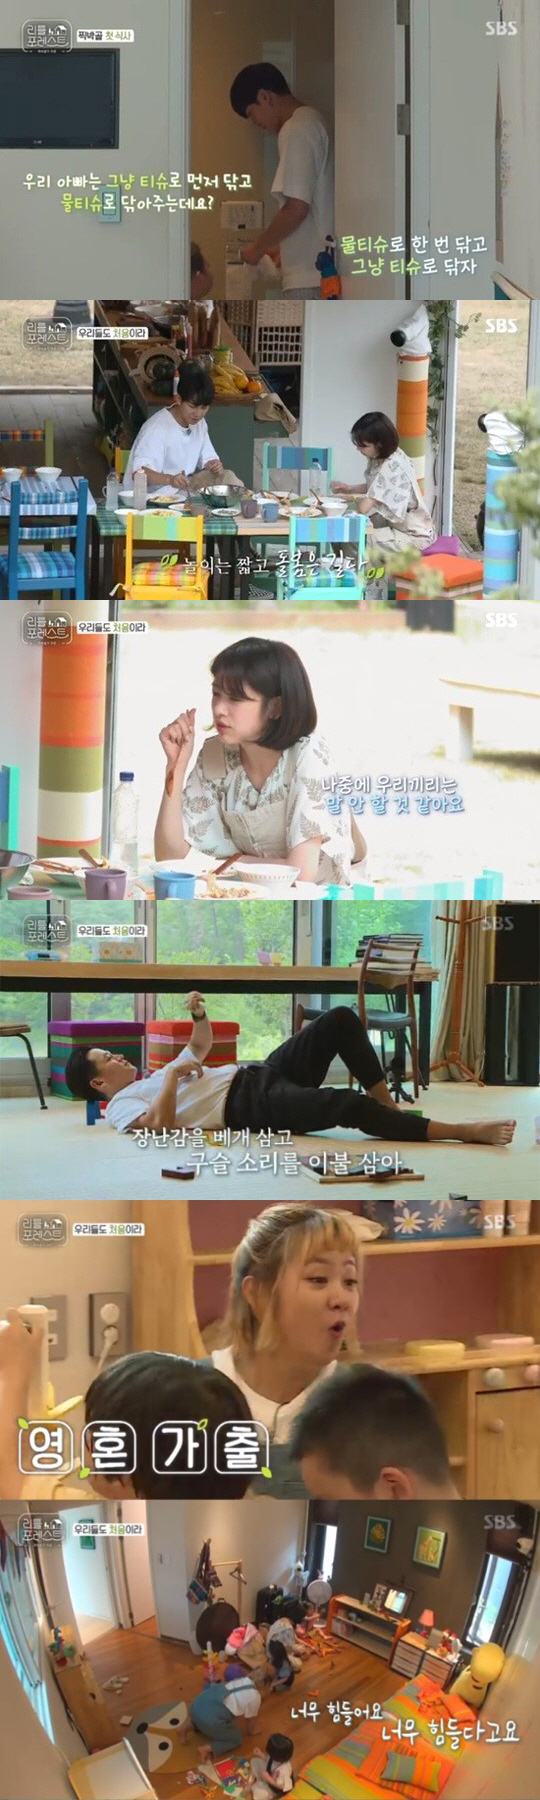 Little Forest Reality Caregivers facing childcare have become exhausted.On the 13th, SBS Little Forest, the childcare of Lee Seo-jin, Lee Seung-gi-gi, Park Na-rae and Jung So-min, who became child care workers, started in earnest.The carers have been showing off their energy in the art, but they have faced the reality that their play with children and childcare are completely different.On this day, Lee Seo-jin and Jung So-min prepared a meal, and Lee Seung-gi-gi and Park Na-rae started to experience animal farms with rabbits and chickens.However, Park Na-rae, who said in a preliminary interview, I am afraid of chickens, said, I will be outside. Lee Seung-gi-gi said, How do I care for five children?What is it that helps if you are outside? Park sighed, Animal farms do not fit me.Lee Seung-gi-gi showed the children chicken and rabbits, and took eggs, but Lee Seung-gi-gis words, Do not give too much carrots to rabbits, were not heard in the childrens ears.Eggs broke, rabbits and chickens escaped, and children poured rabbits into the chicken coop.Park Na-rae, who was looking at Lee Seung-gi-gis struggle from outside, apologized, saying, Im sorry.Instead, Park returned to the hostel as requested by Lee Seung-gi-gi and brought the dustpan, and then went back to the hostel to pick up sunscreen for the children.When Lee Seung-gi-gi misapplied sunscreen and made the childrens faces break down, sunscreen was also part of Park Na-rae.In the meantime, Lee Seo-jin and Jung So-min prepared the whirlwind omelet and egg soup.Jung So-min did not turn on the induction, and received a grudge from Lee Seo-jin and the production team called cooking blank paper and cooking raw stone, but the finished food showed a great visual.But as they were feeding their children, the carers could not eat, and one child found the bathroom because his stomach was sick, and Lee Seung-gi Gi followed him.The child said, My father wipes it with tissue and wipes it with wet tissue. Lee Seung-gi-gi also did as the child said.Jung So-min said, Even a 7-year-old child can not go to the bathroom alone. Lee Seung-gi-gi explained, Even if you look at your work alone, you have to wipe it.Lee Seung-gi-gi, who barely ate, said, It is possible to play, but it is another story to take care of the child.Lee Seung-gi-gi laughed at Jung So-min, saying, The horse has decreased, and Jung So-min replied, I do not think we will say anything.Lee Seo-jin was forced to finish the meal to help the children brush their teeth.After the meal, the children ran vigorously. Park said, Its hard. Its too hard. Jung So-min said, Im going to die.Four carers were exhausted and lay down in half a day after the start of childcare.